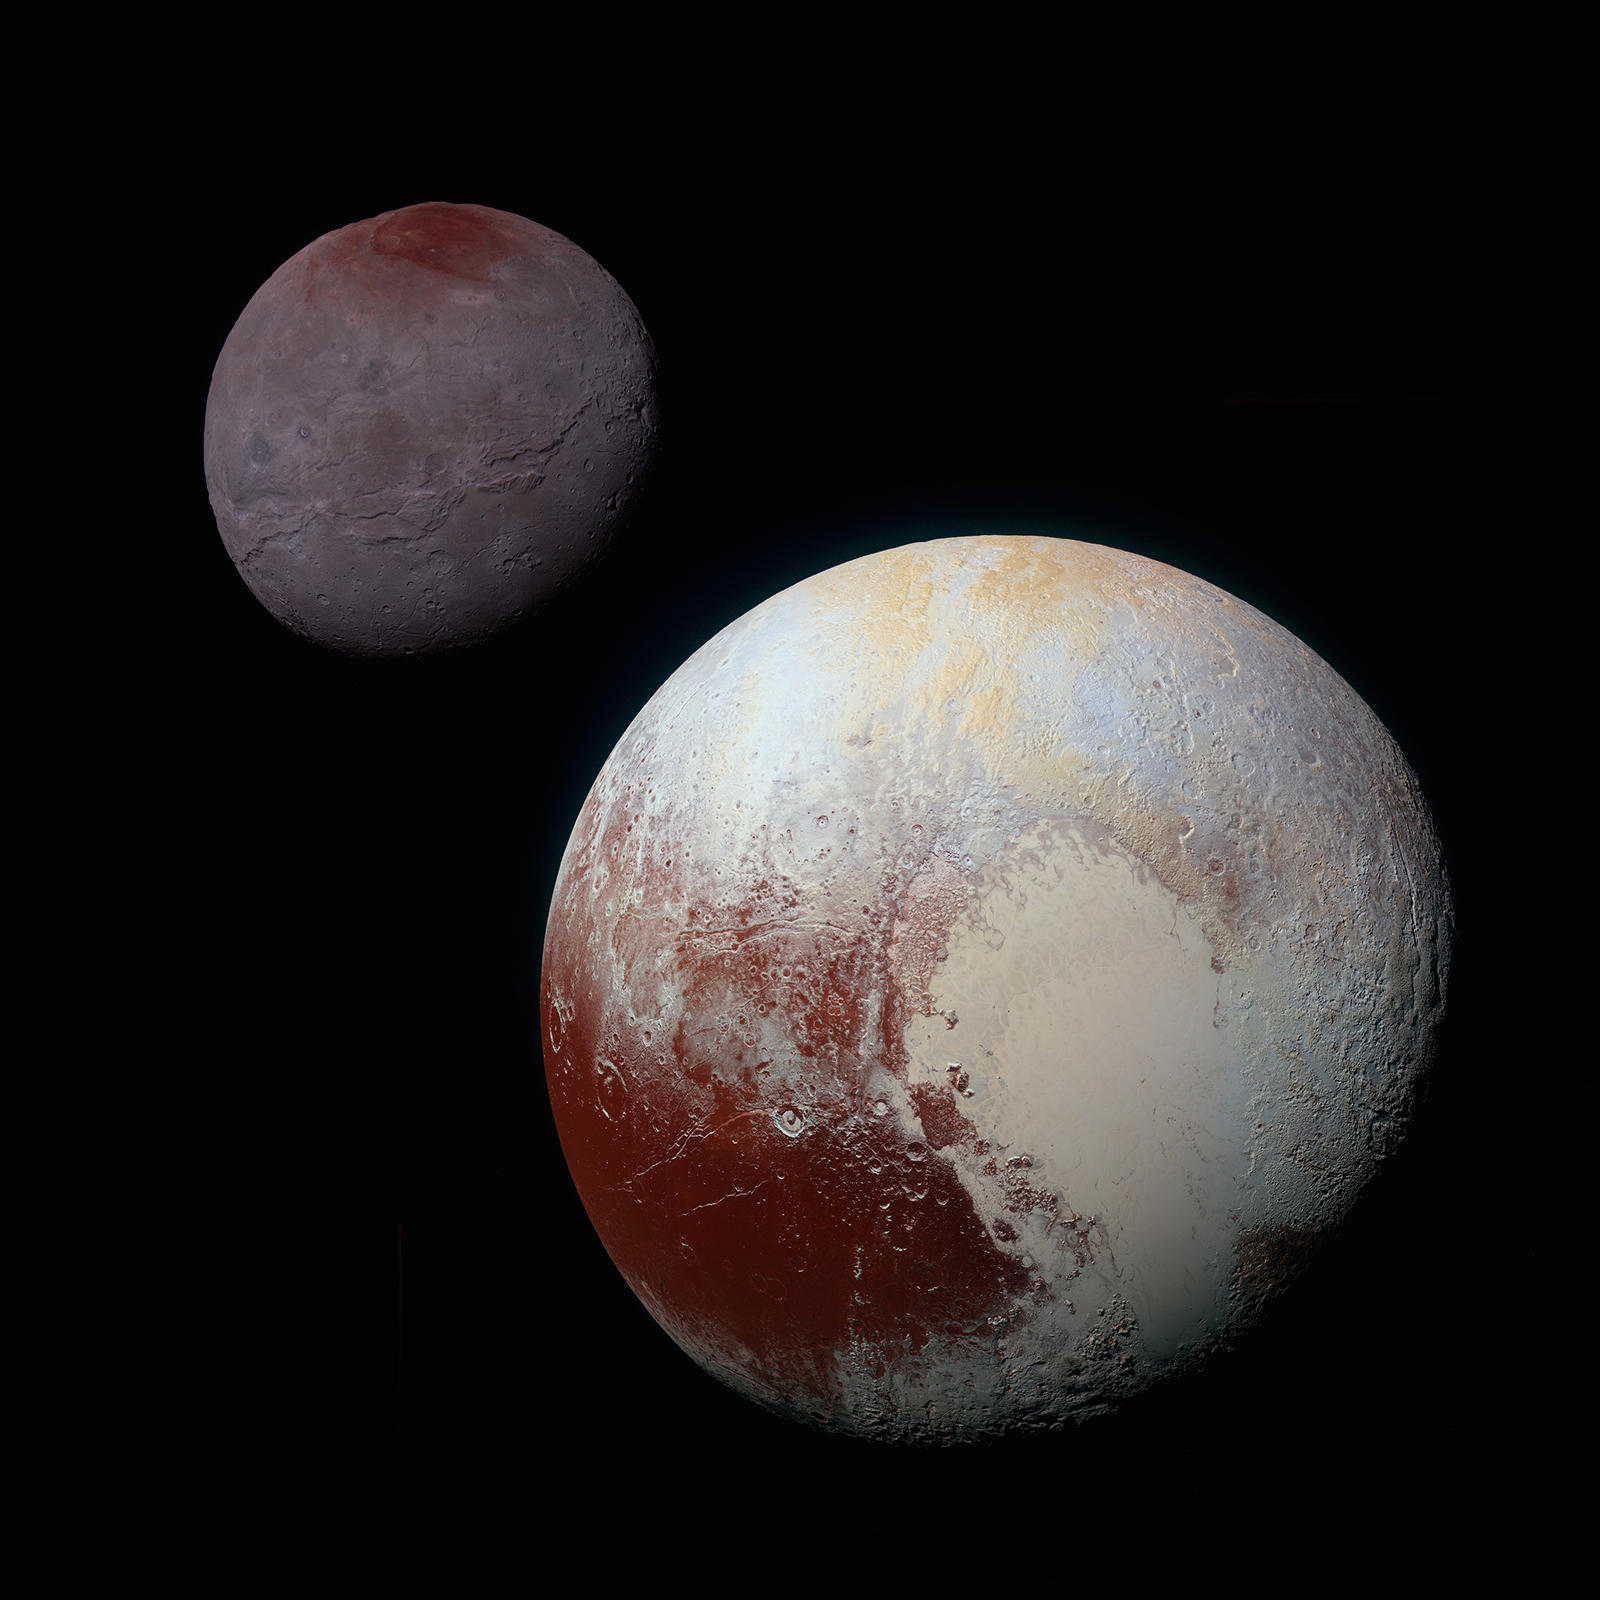 Pluto in front of Charon.